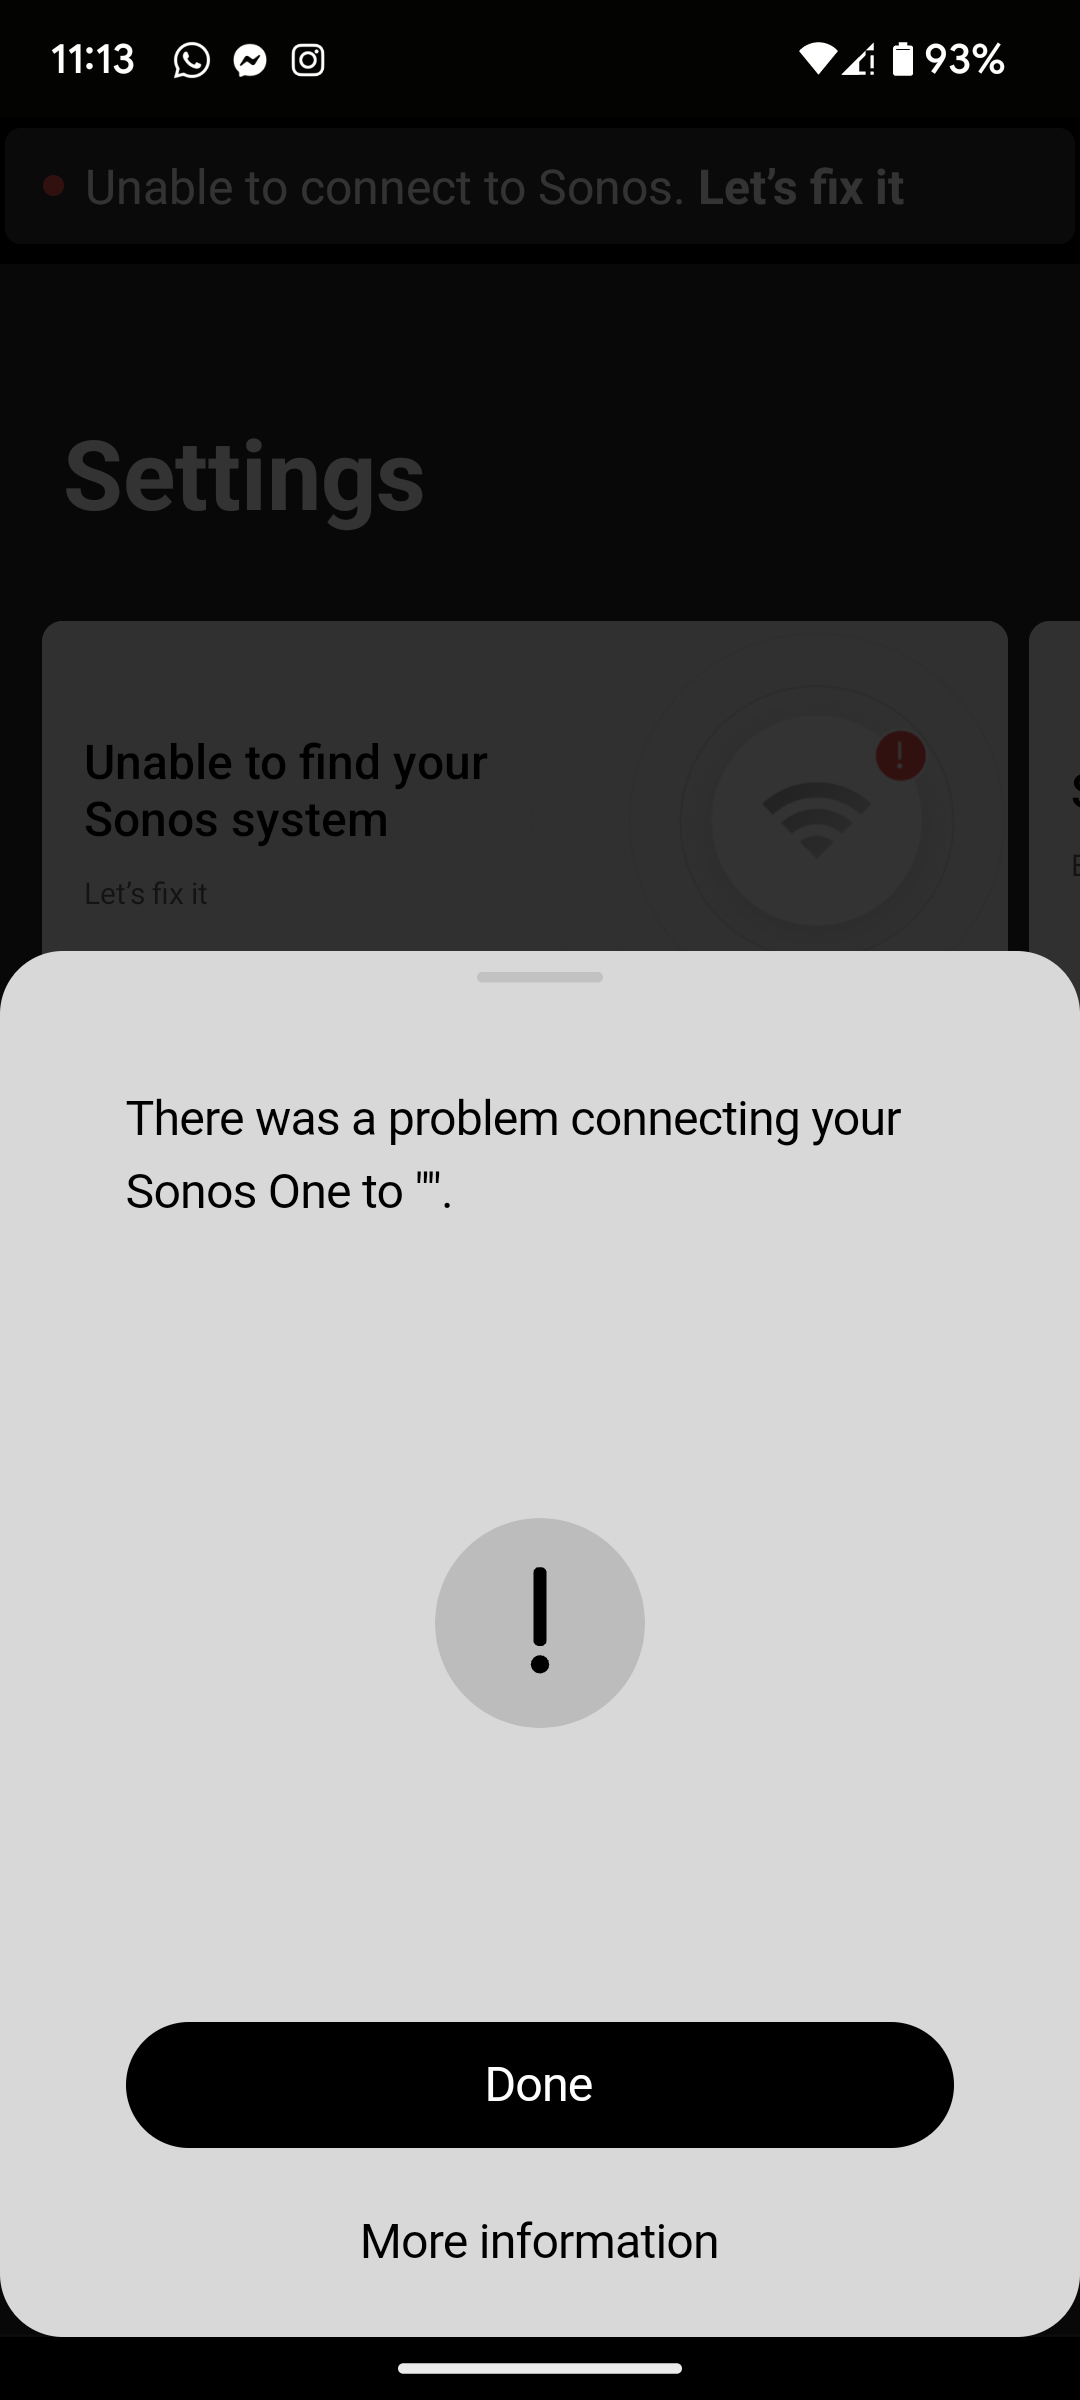 There was your Sonos One ". | Sonos Community